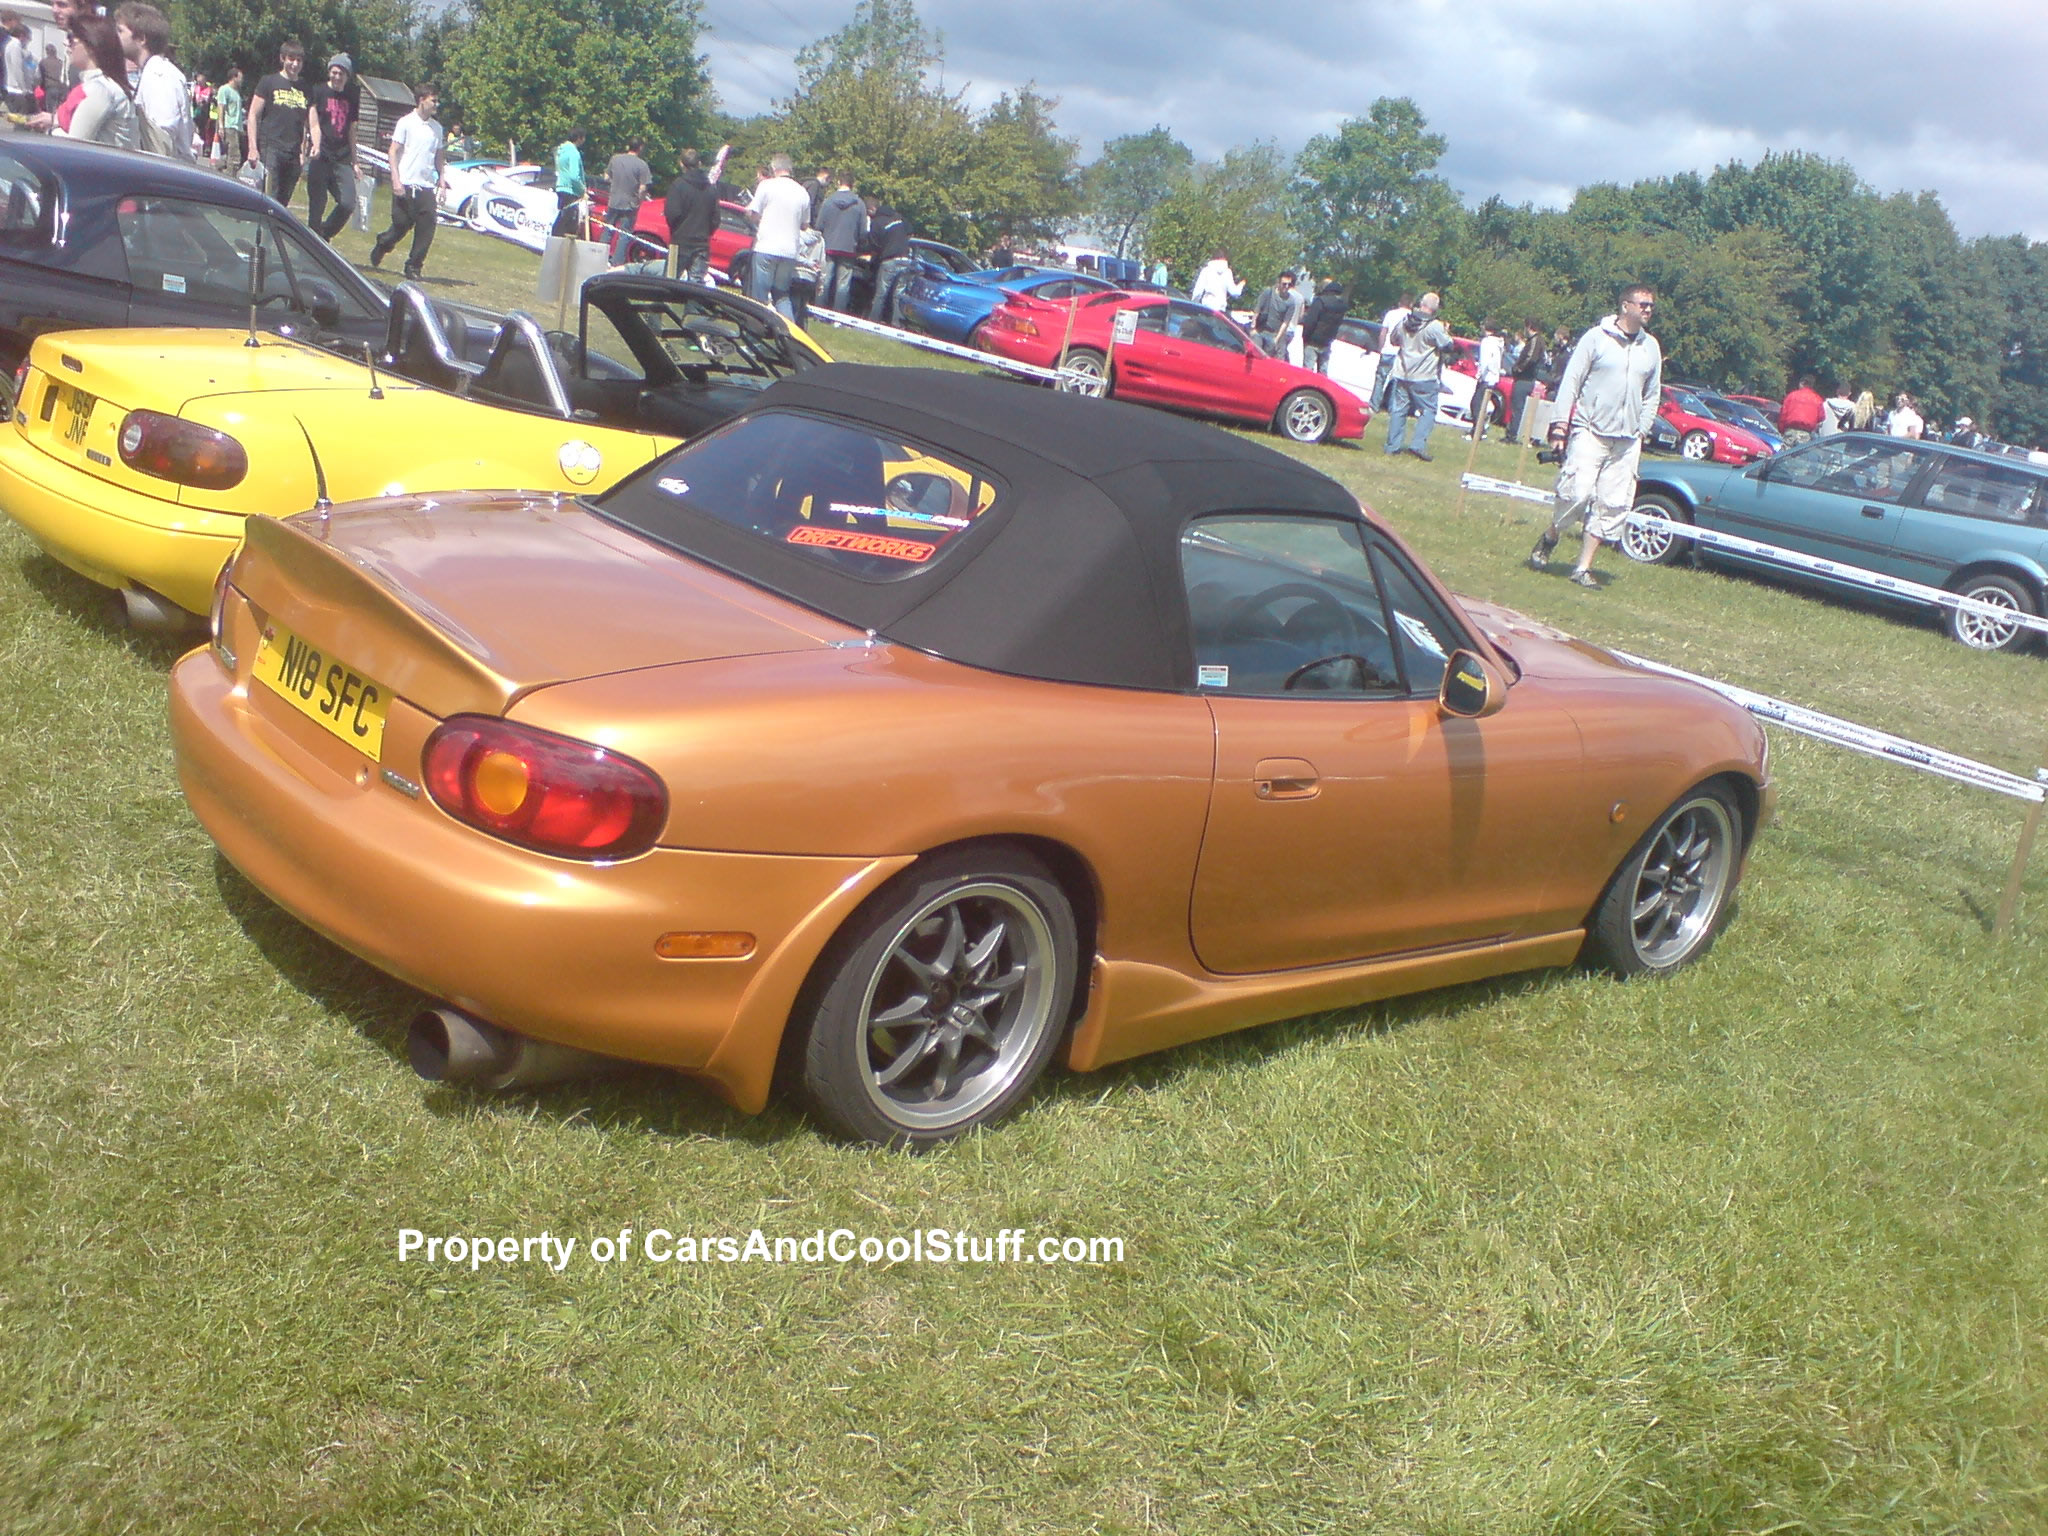 Mazda Eunos Roadster. Permanent link to this article: